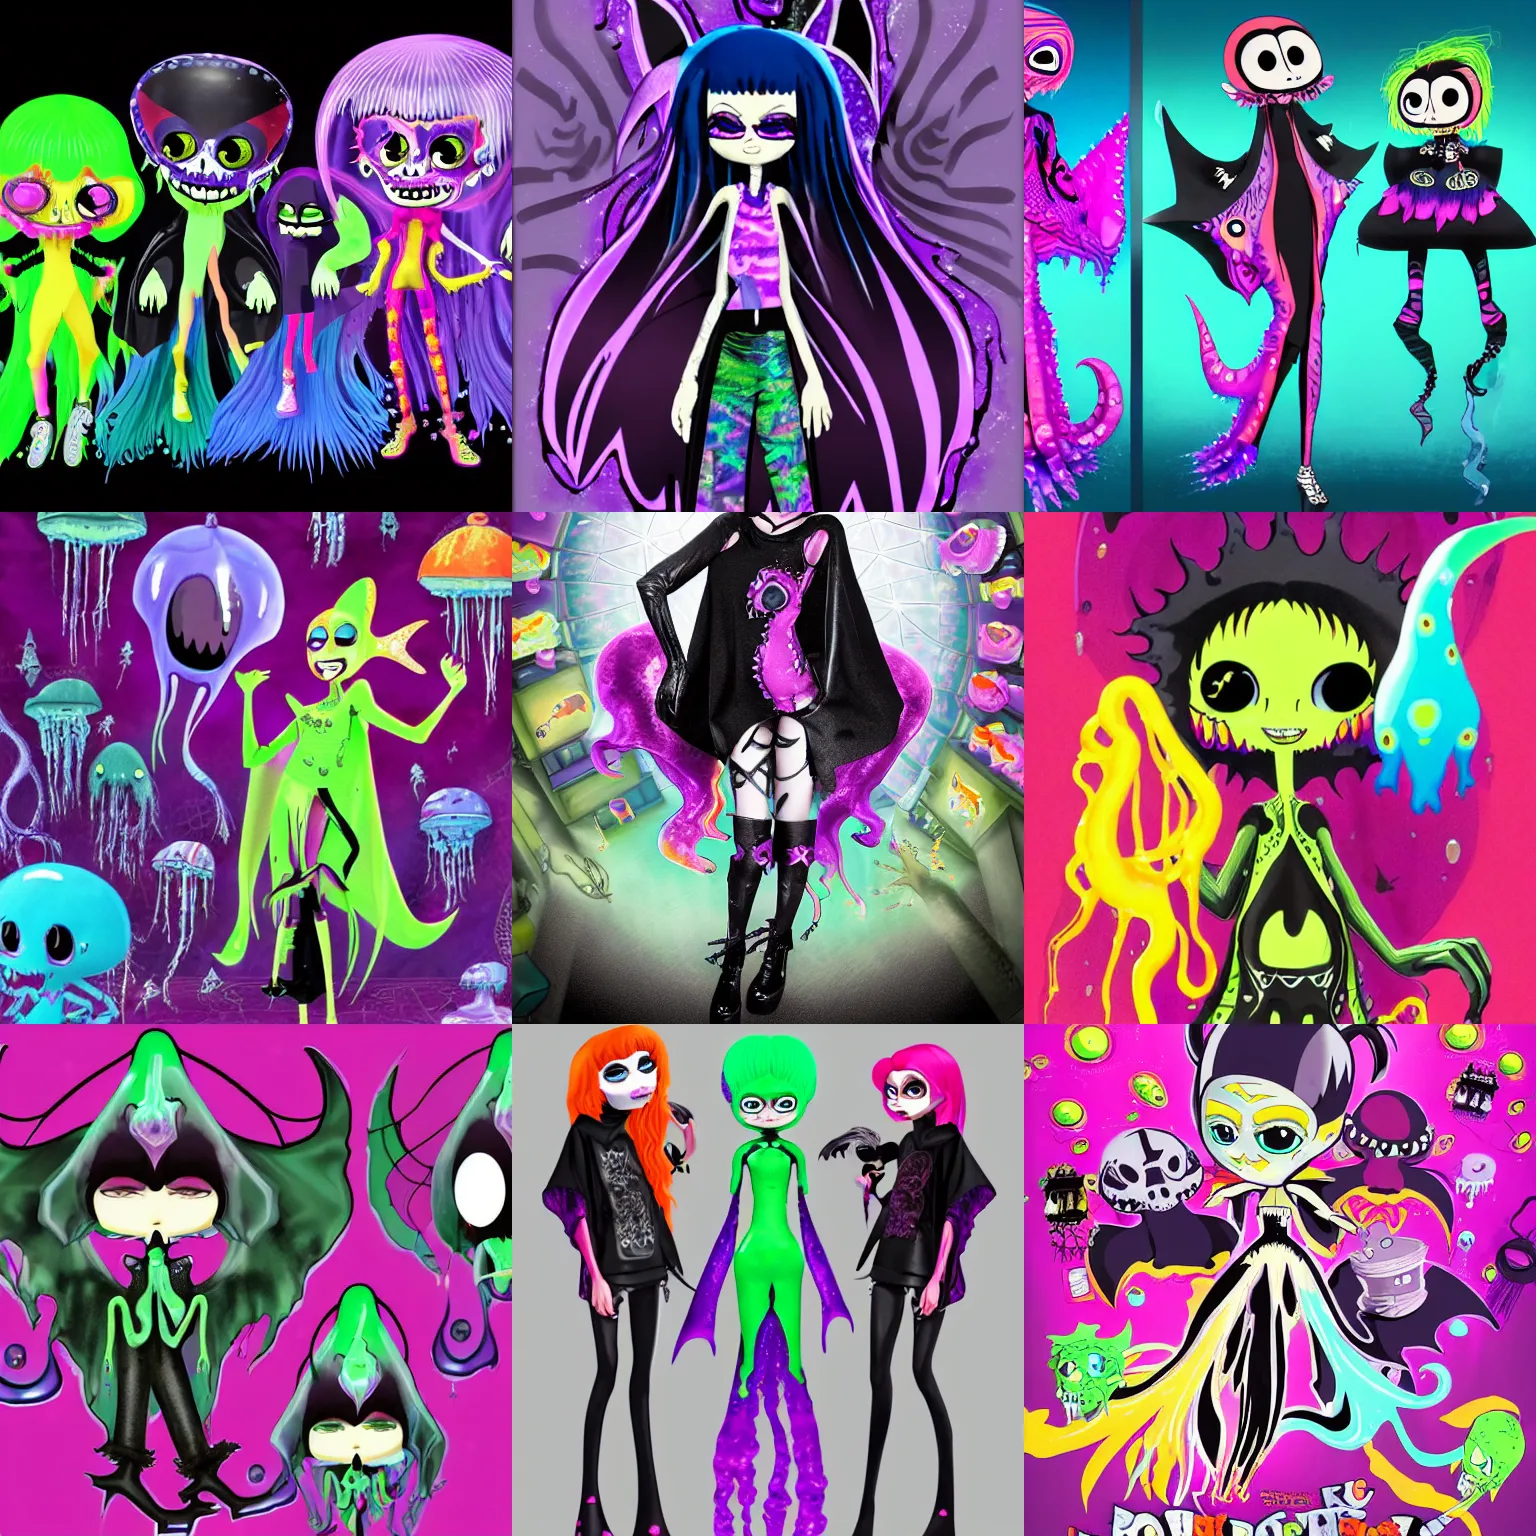 Prompt: lisa frank gothic emo punk vampiric rockstar vampire squid with transparent jellyfish skin character designs of various shapes and sizes by genndy tartakovsky and splatoon by nintendo for the new hotel transylvania film starring a vampire squid cthulu kraken monster rockstar wearing a bat shaped poncho cape with platform shoes